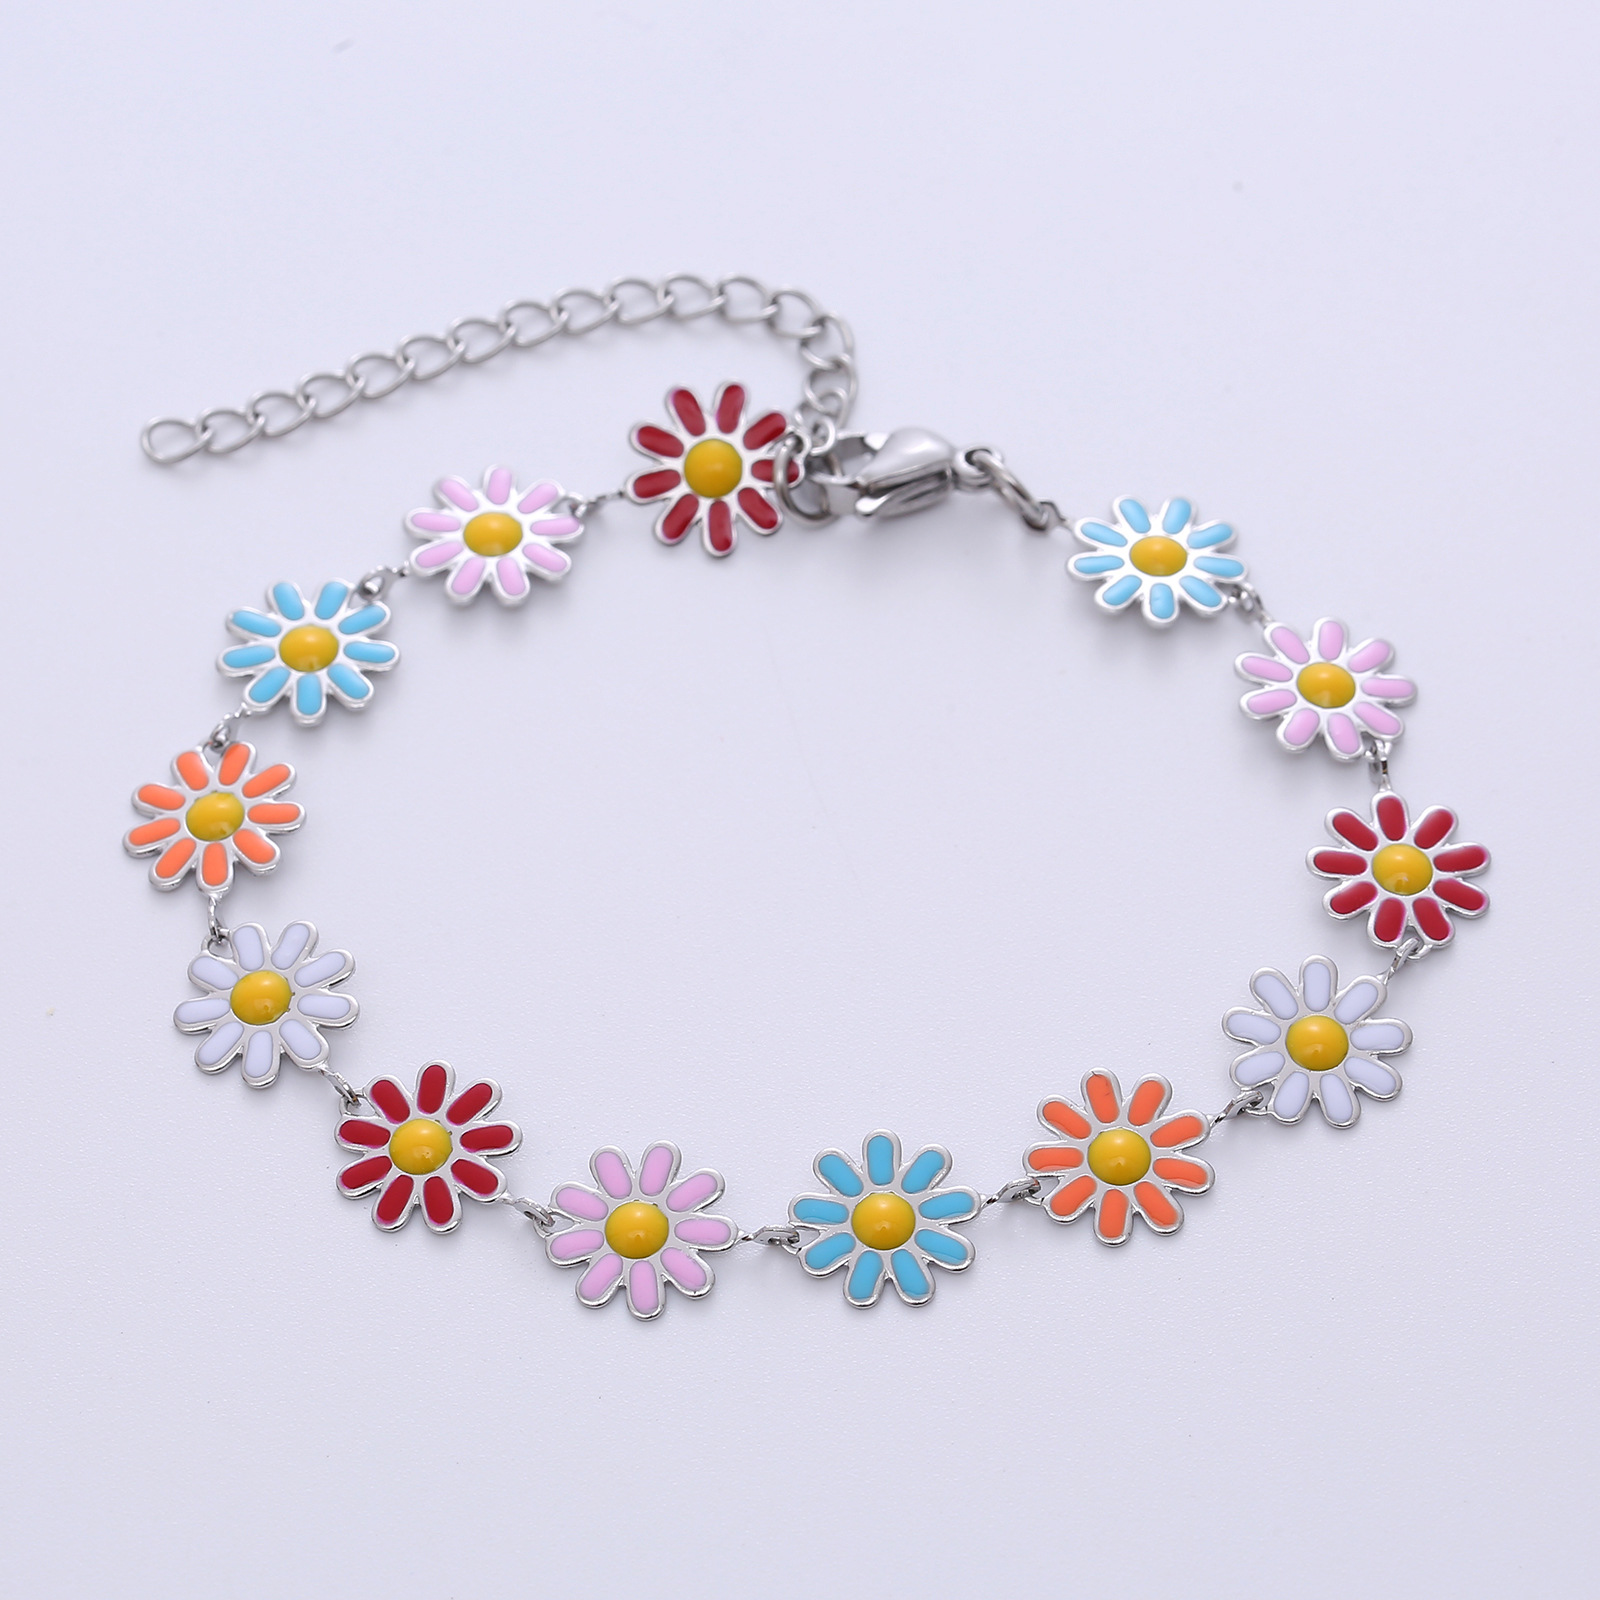 1:Silver, mixed color flower 1